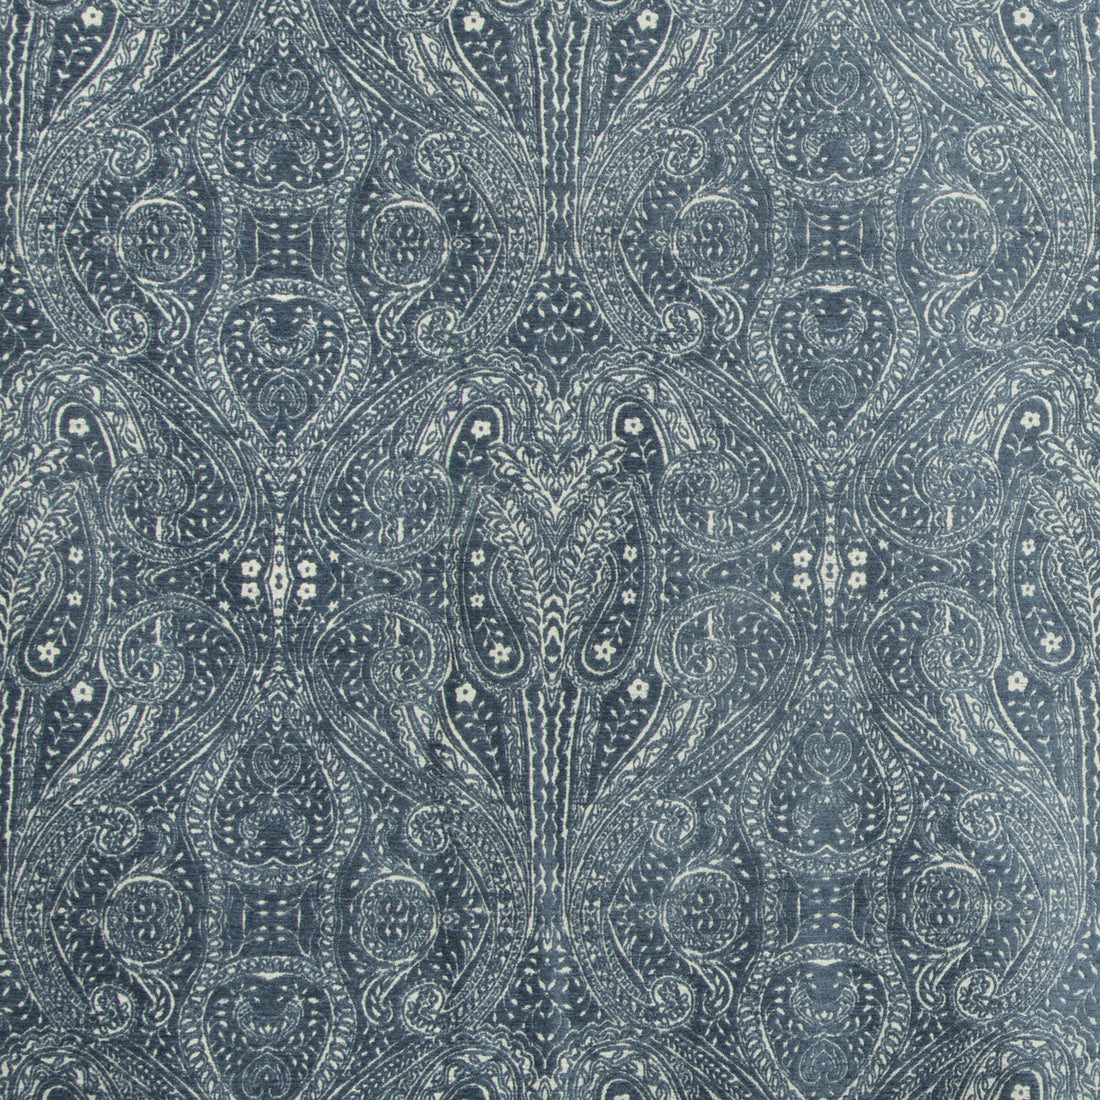 Kravet Contract fabric in 34767-5 color - pattern 34767.5.0 - by Kravet Contract in the Gis collection